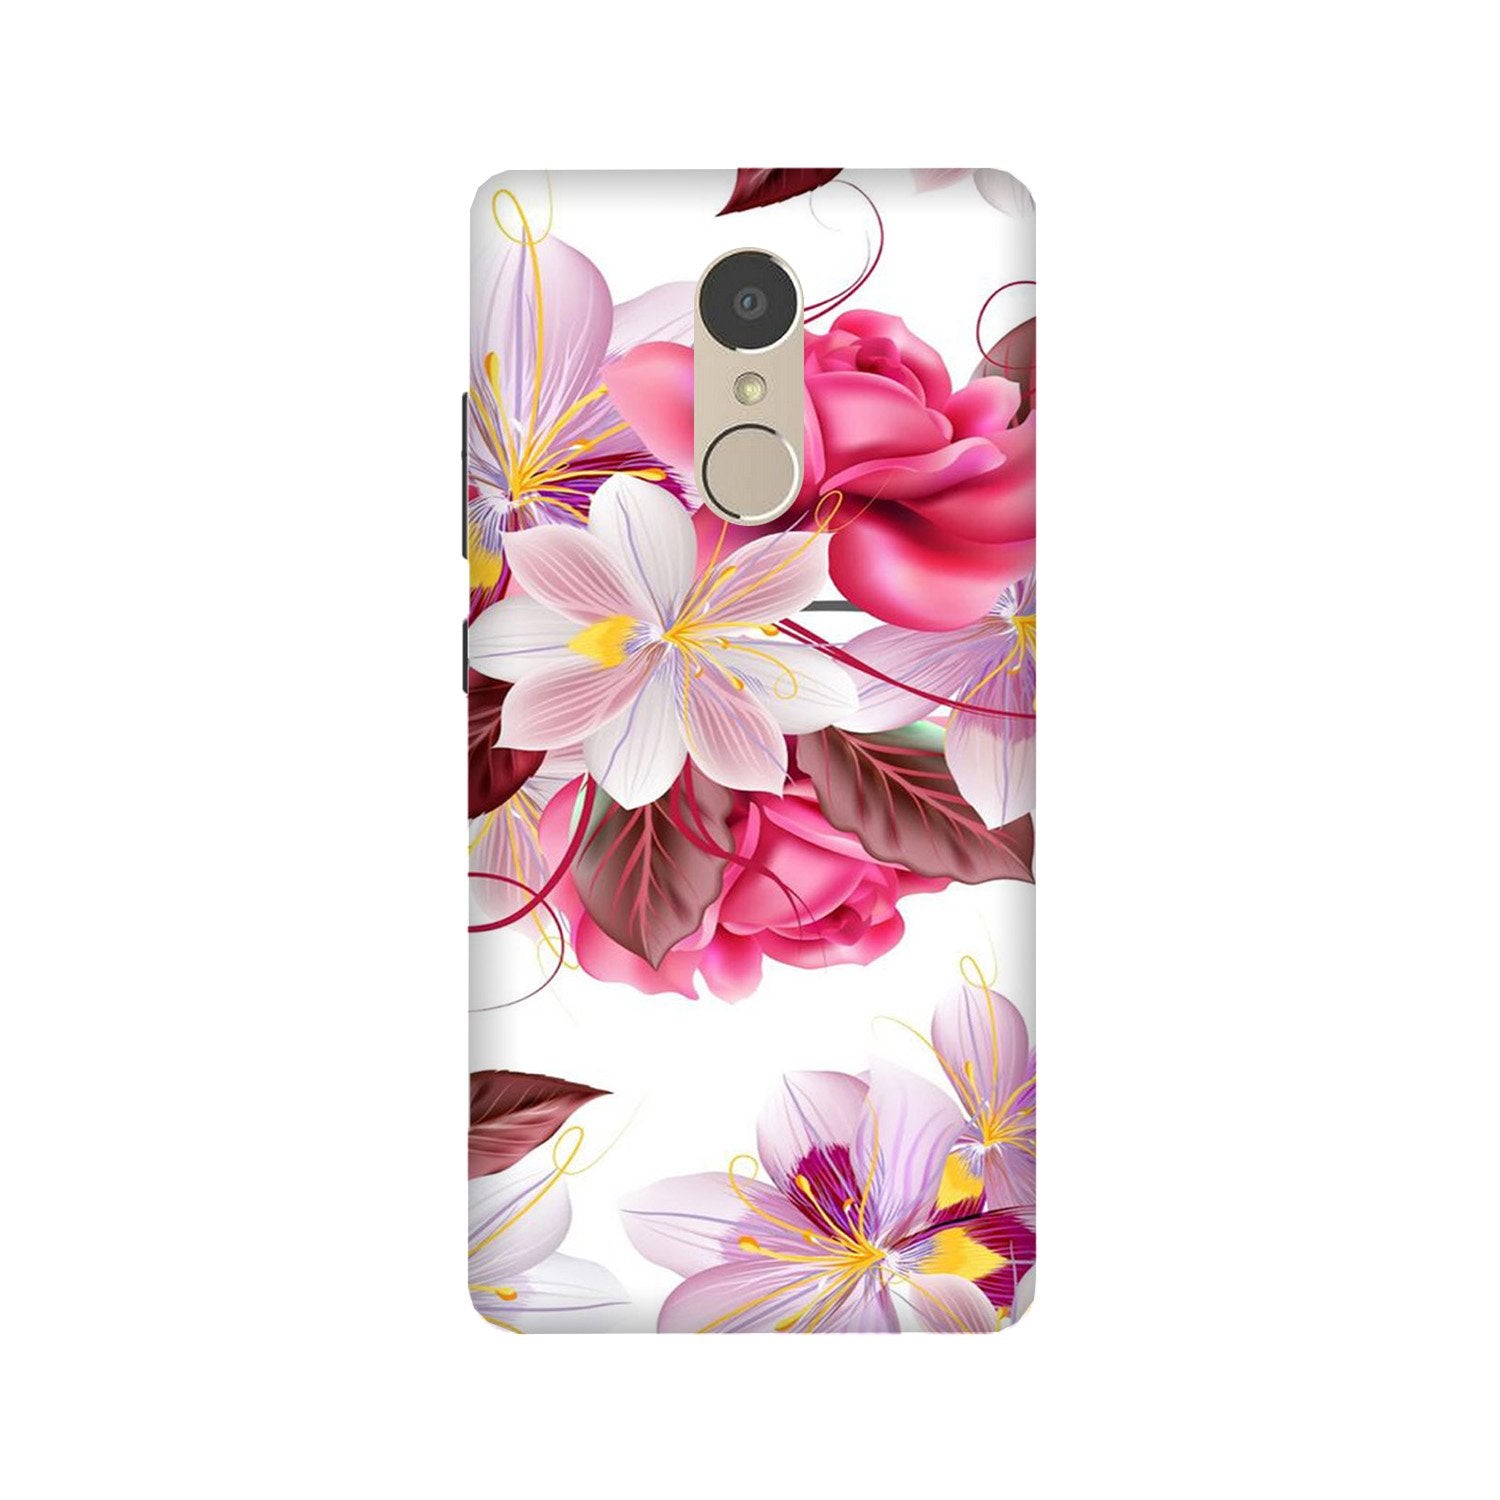 Beautiful flowers Case for Lenovo K6 Note